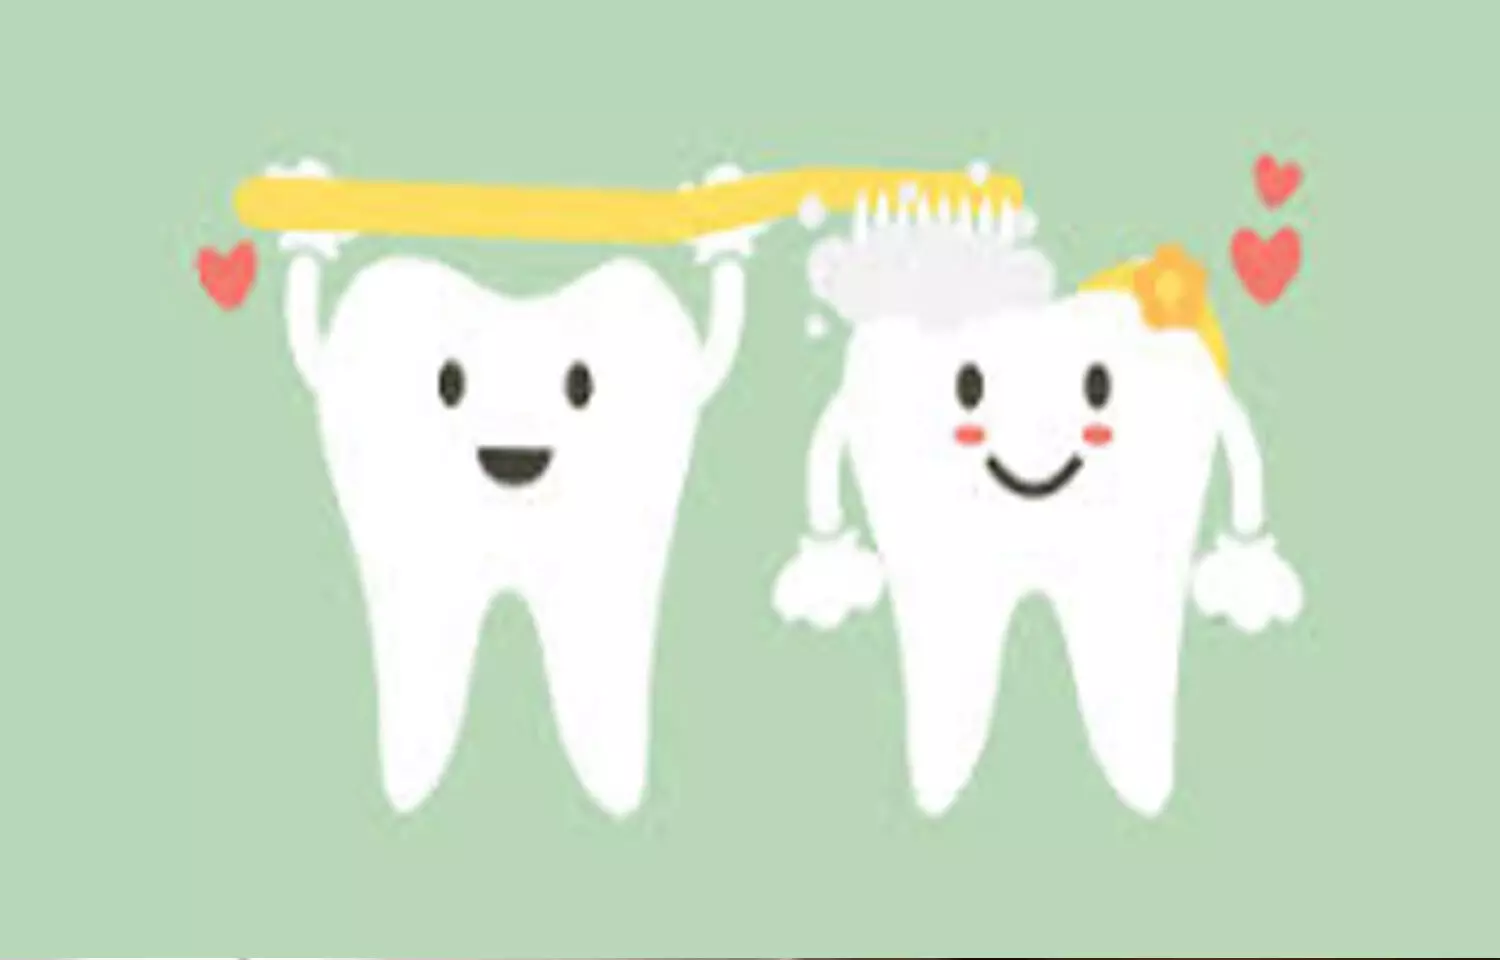 Toothbrush disinfection may help protect against COVID-19